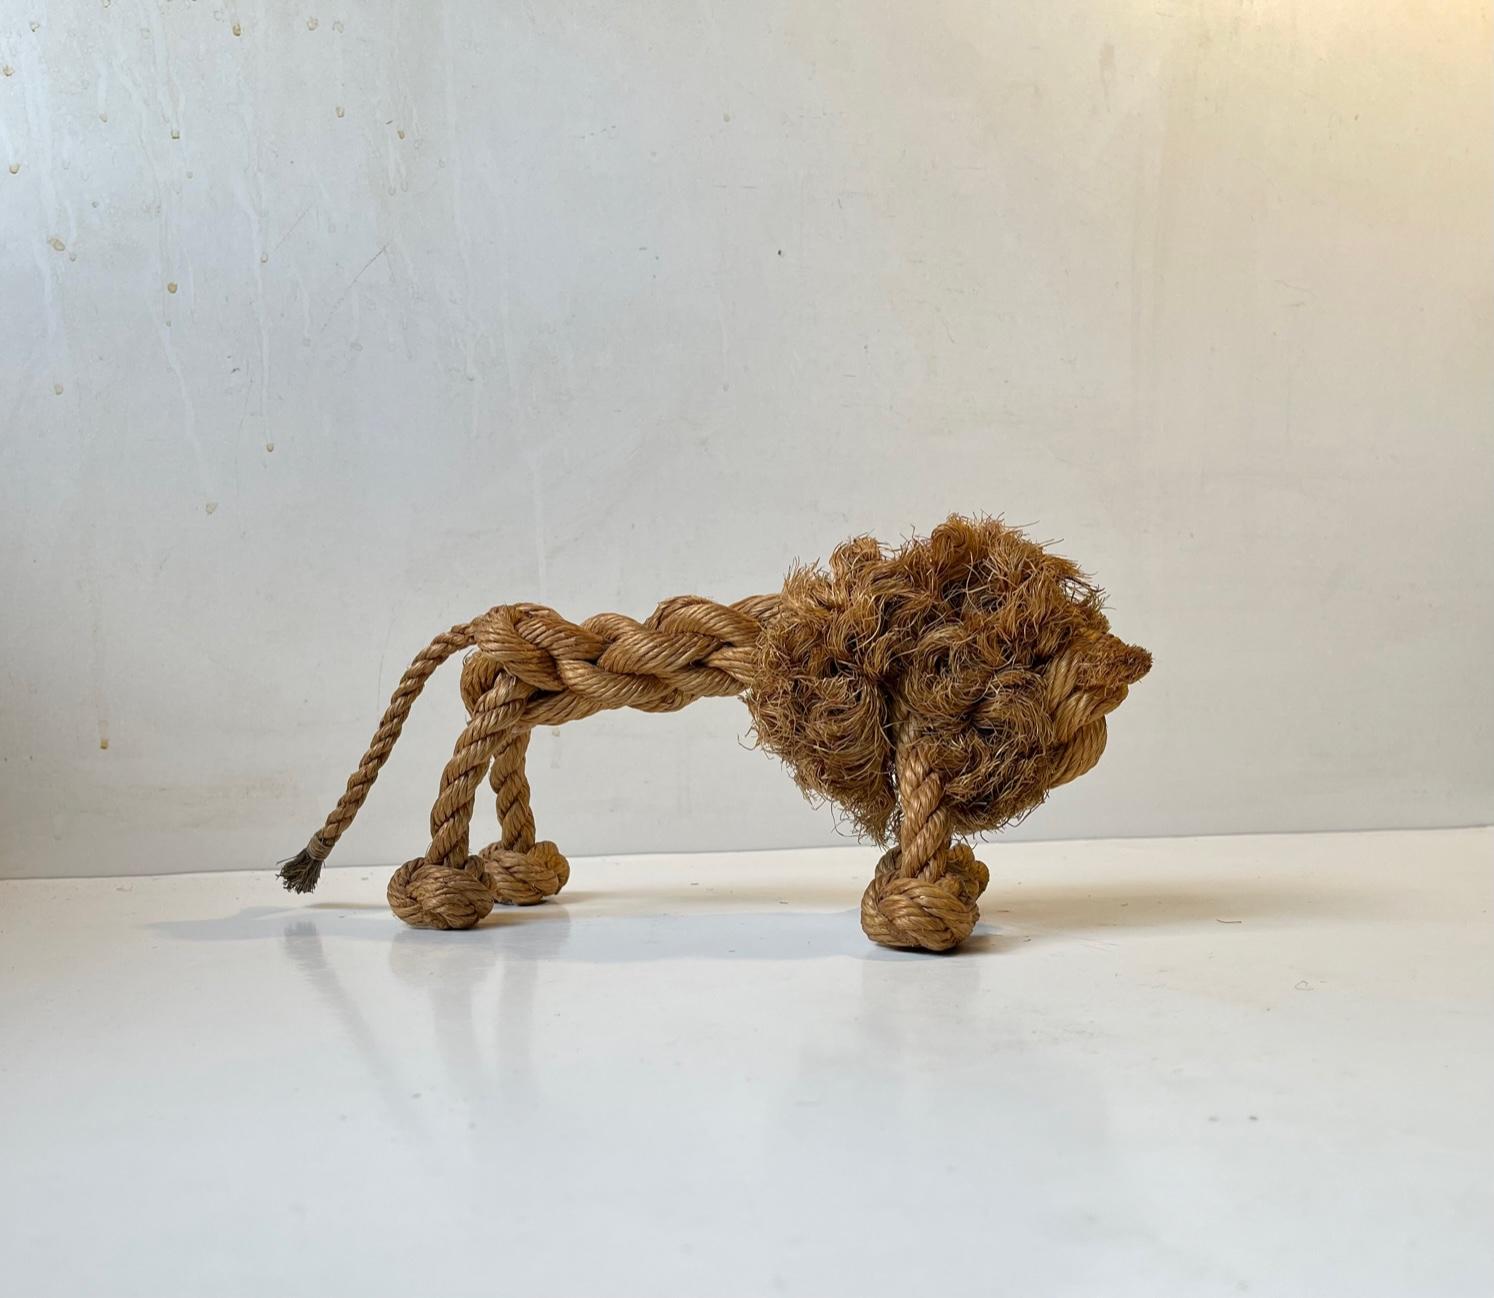 A rare example of the Danish toy-design-master Kay Bojesen work. This lion in braided natural rope was designed I collaboration between Jorgen Bloch and Kay Bojesen in latter part of the 1950s and it was discontinued in the catalogue after a few